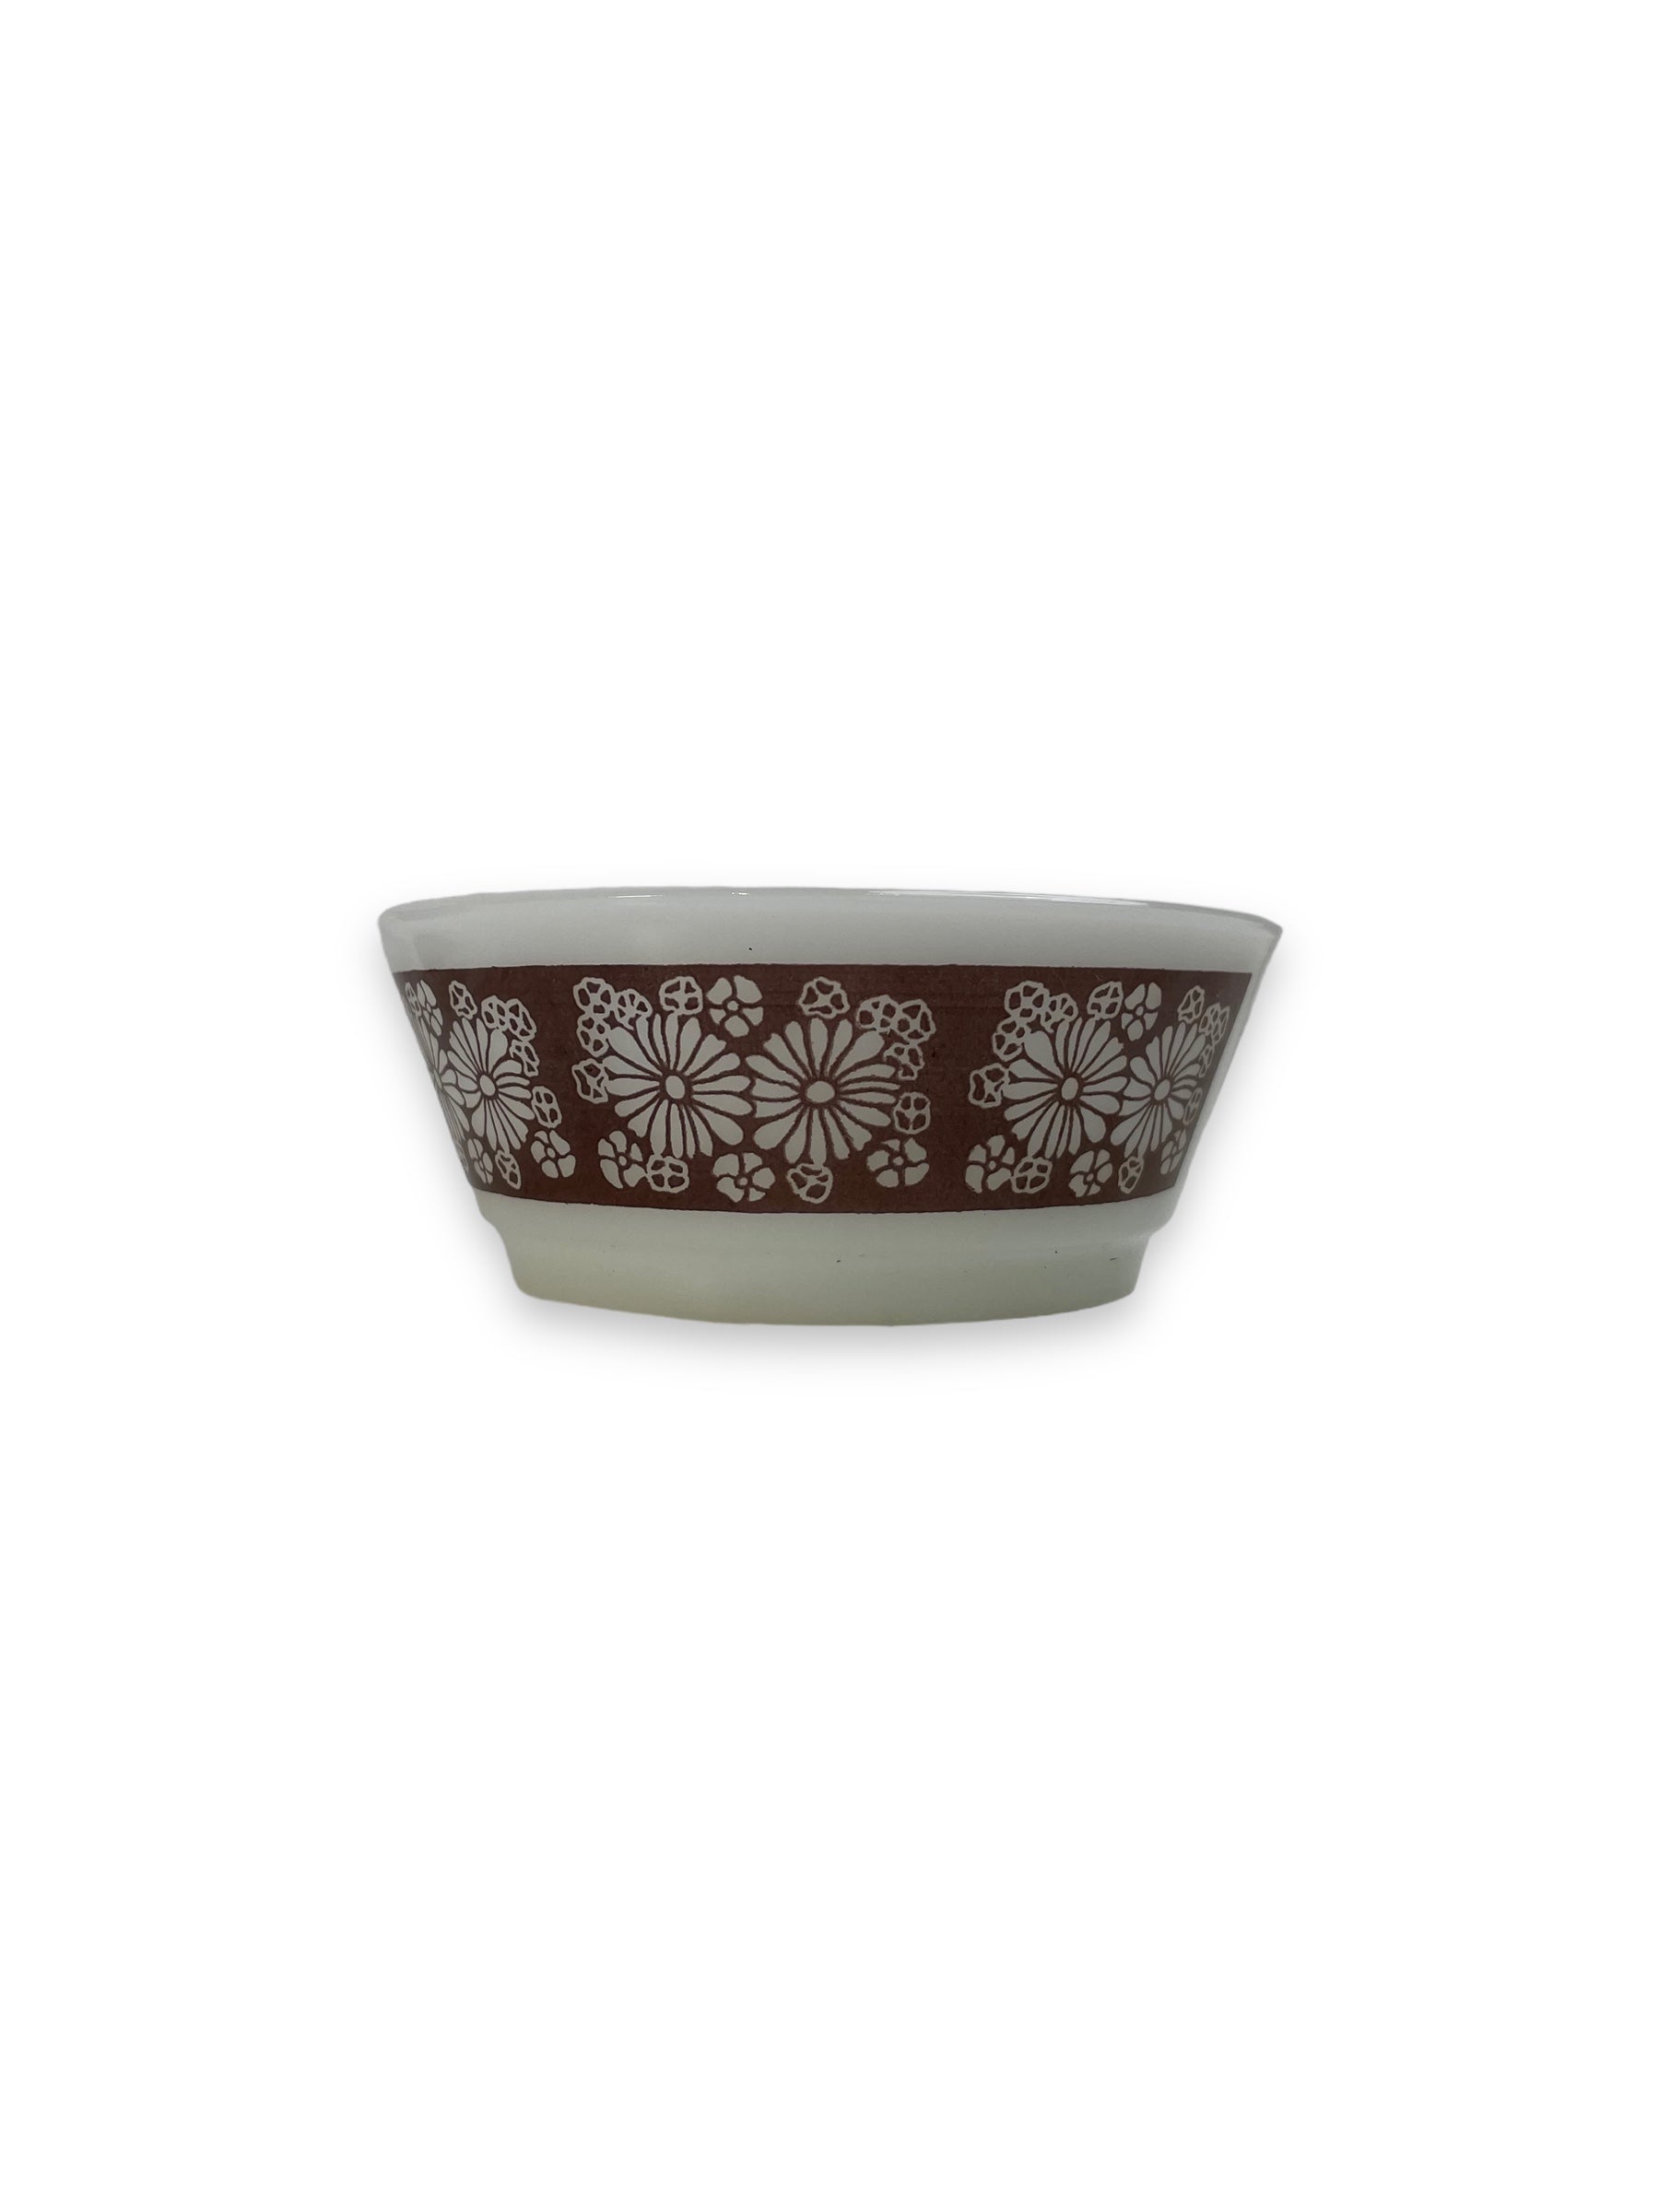 Set of 4 Anchor Hocking Fire King Brown Daisy Cereal Bowls